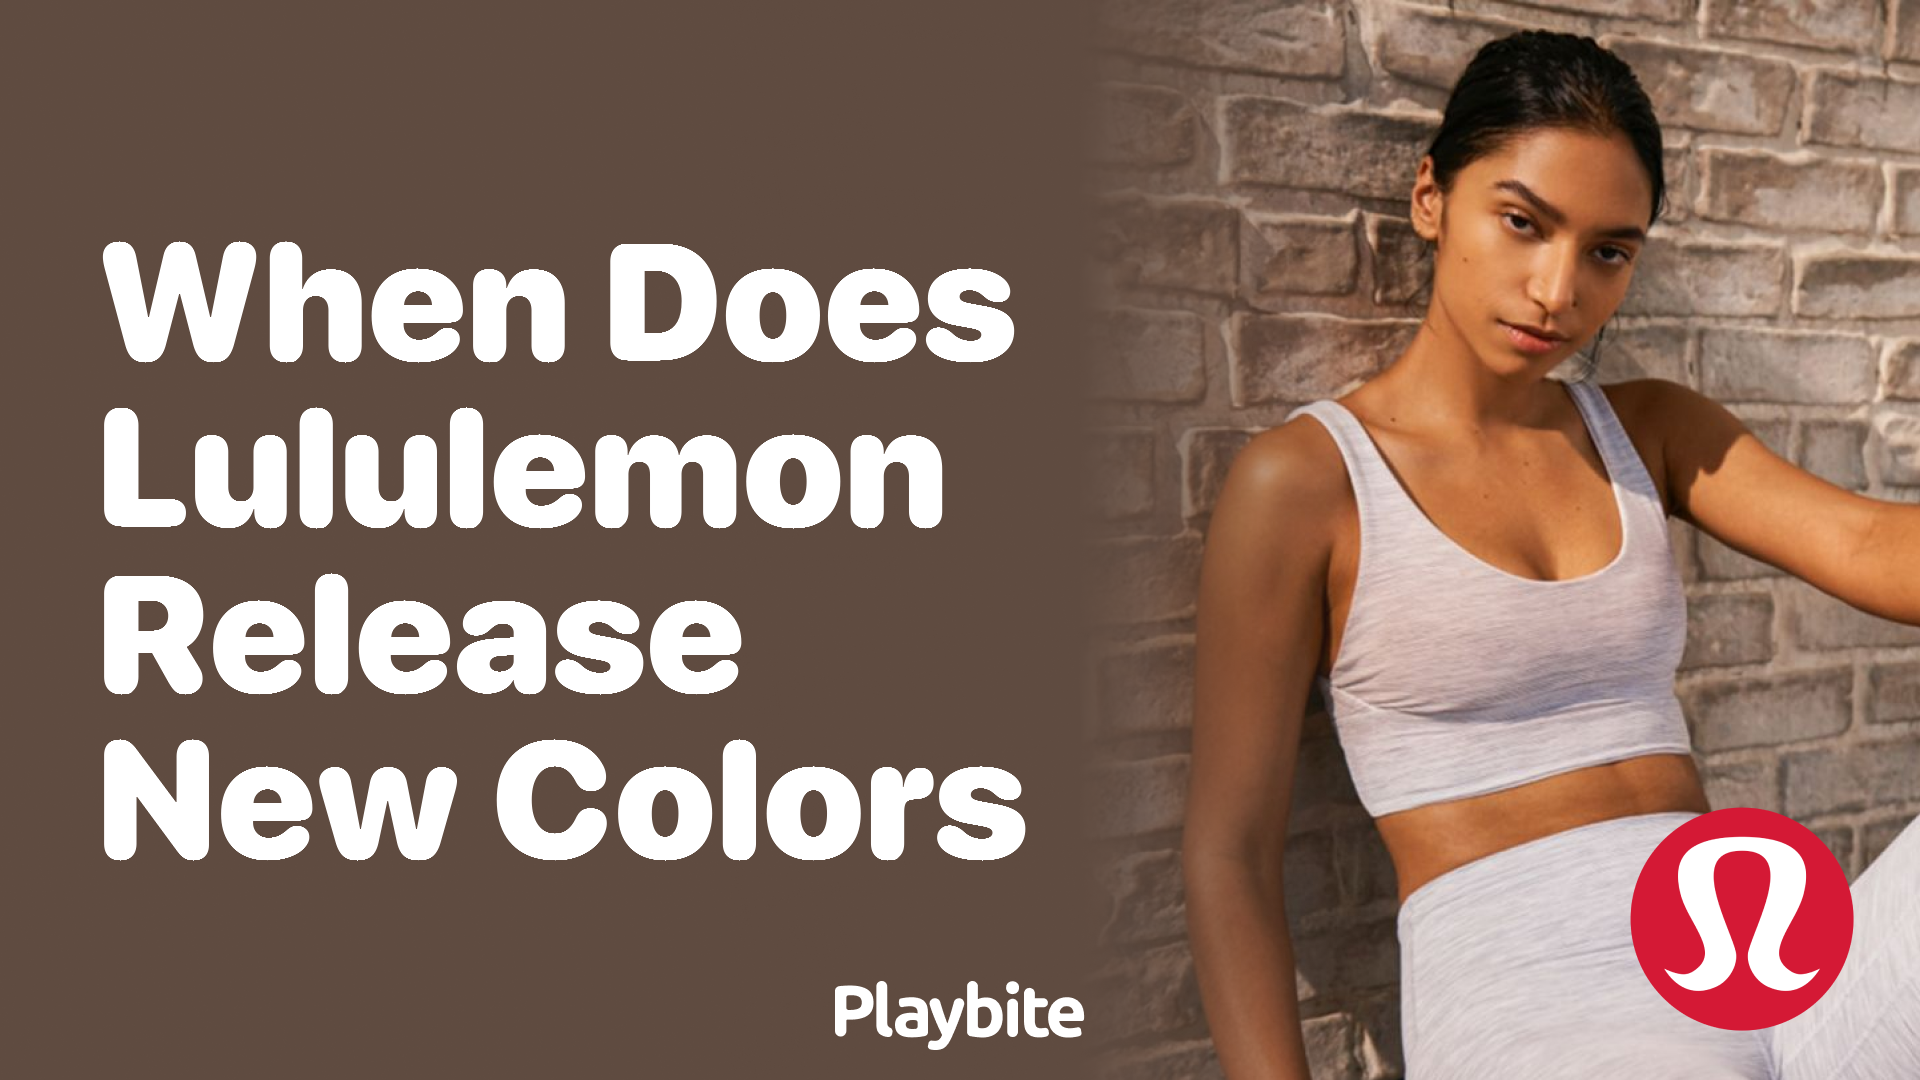 When Does Lululemon Release New Colors? Find Out Now! - Playbite